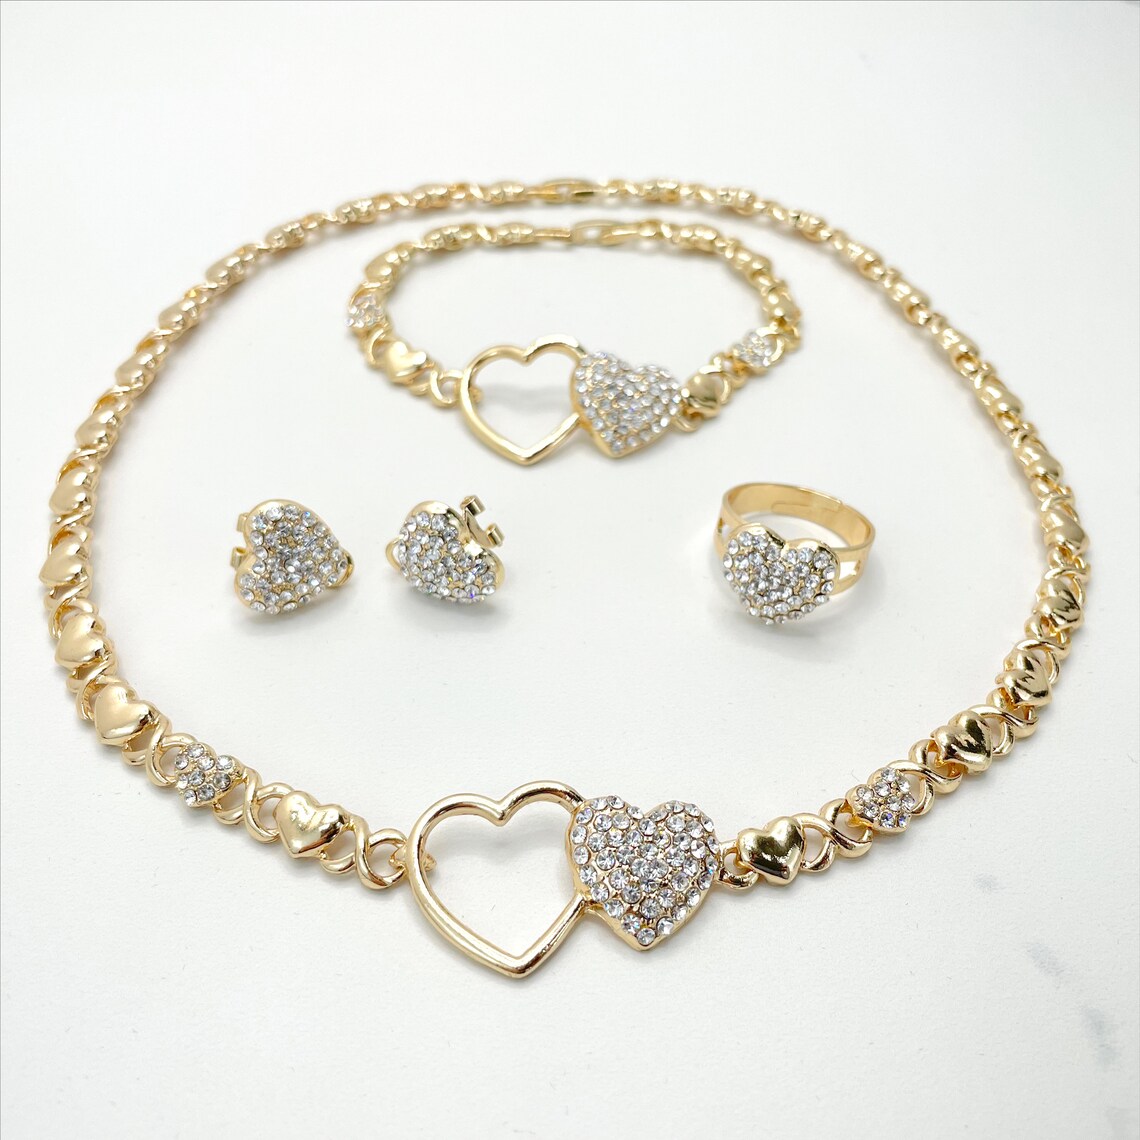 Cubic Zirconia Double Hearts with XoXo Chain Necklace Bracelet Ring Earrings Set